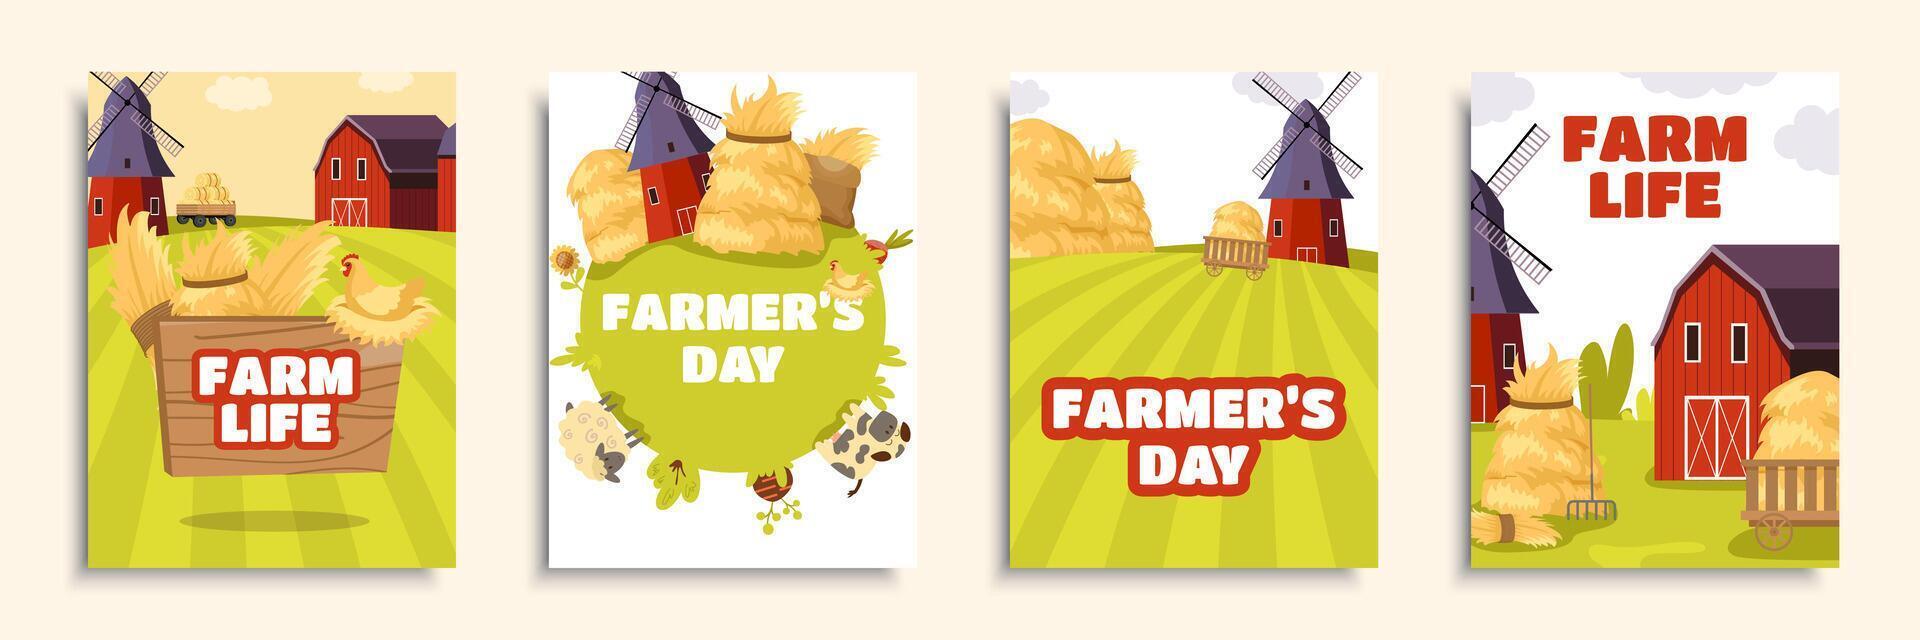 Farm life cover brochure set in flat design. Poster templates with mills, barns for hay, straw haystacks, plantation fields, poultry and livestock farming, gardening business. Vector illustration